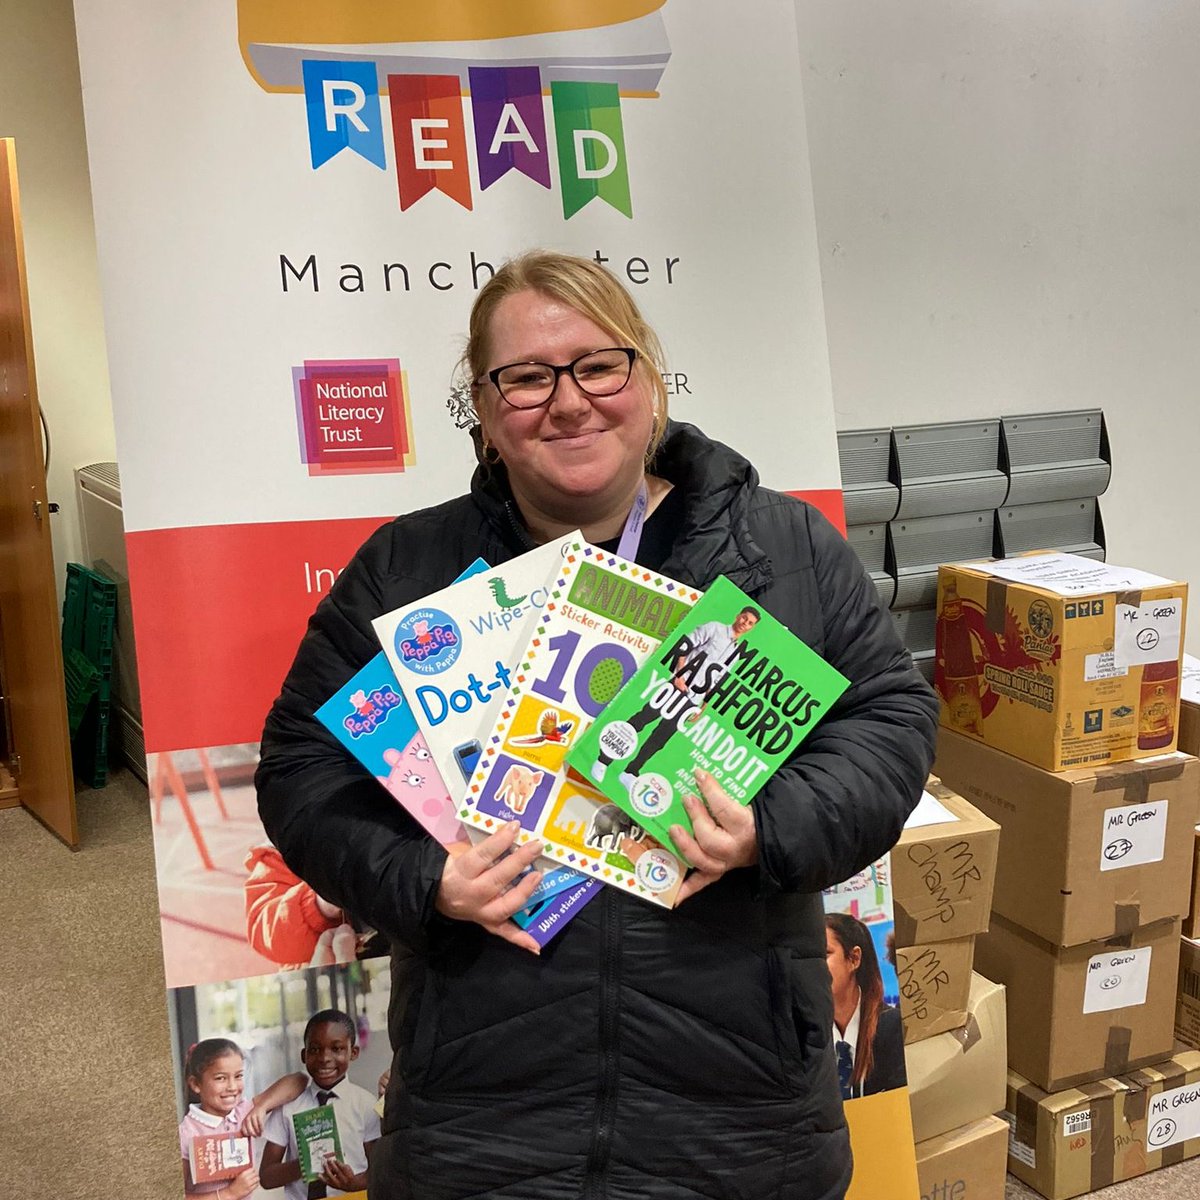 Our new library at Leo Kelly School is almost ready and is looking even more exciting, thanks to the donation of over 100 books from @MancLibraries!
Thankyou #ReadMCR